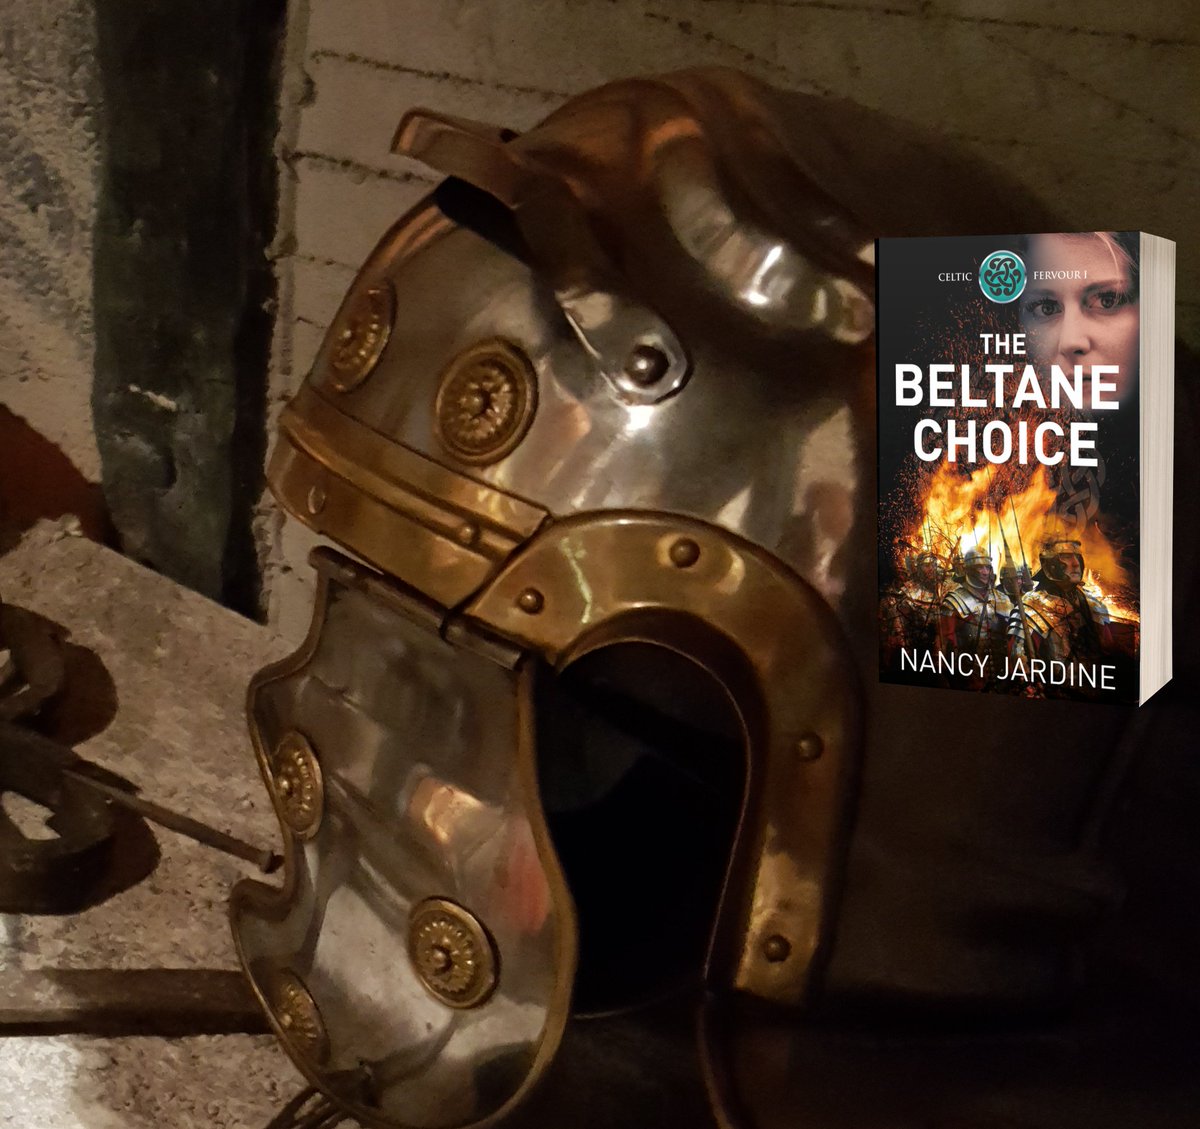 Making a bargain, between late Iron Age tribes, to confront the #RomanEmpire Legions together should be easy? Does Selgovae Nara find it so? Or Lorcan of the Brigantes? Bk 1 Celtic Fervour Series #HistoricalFiction #KindleUnlimited getbook.at/findhere